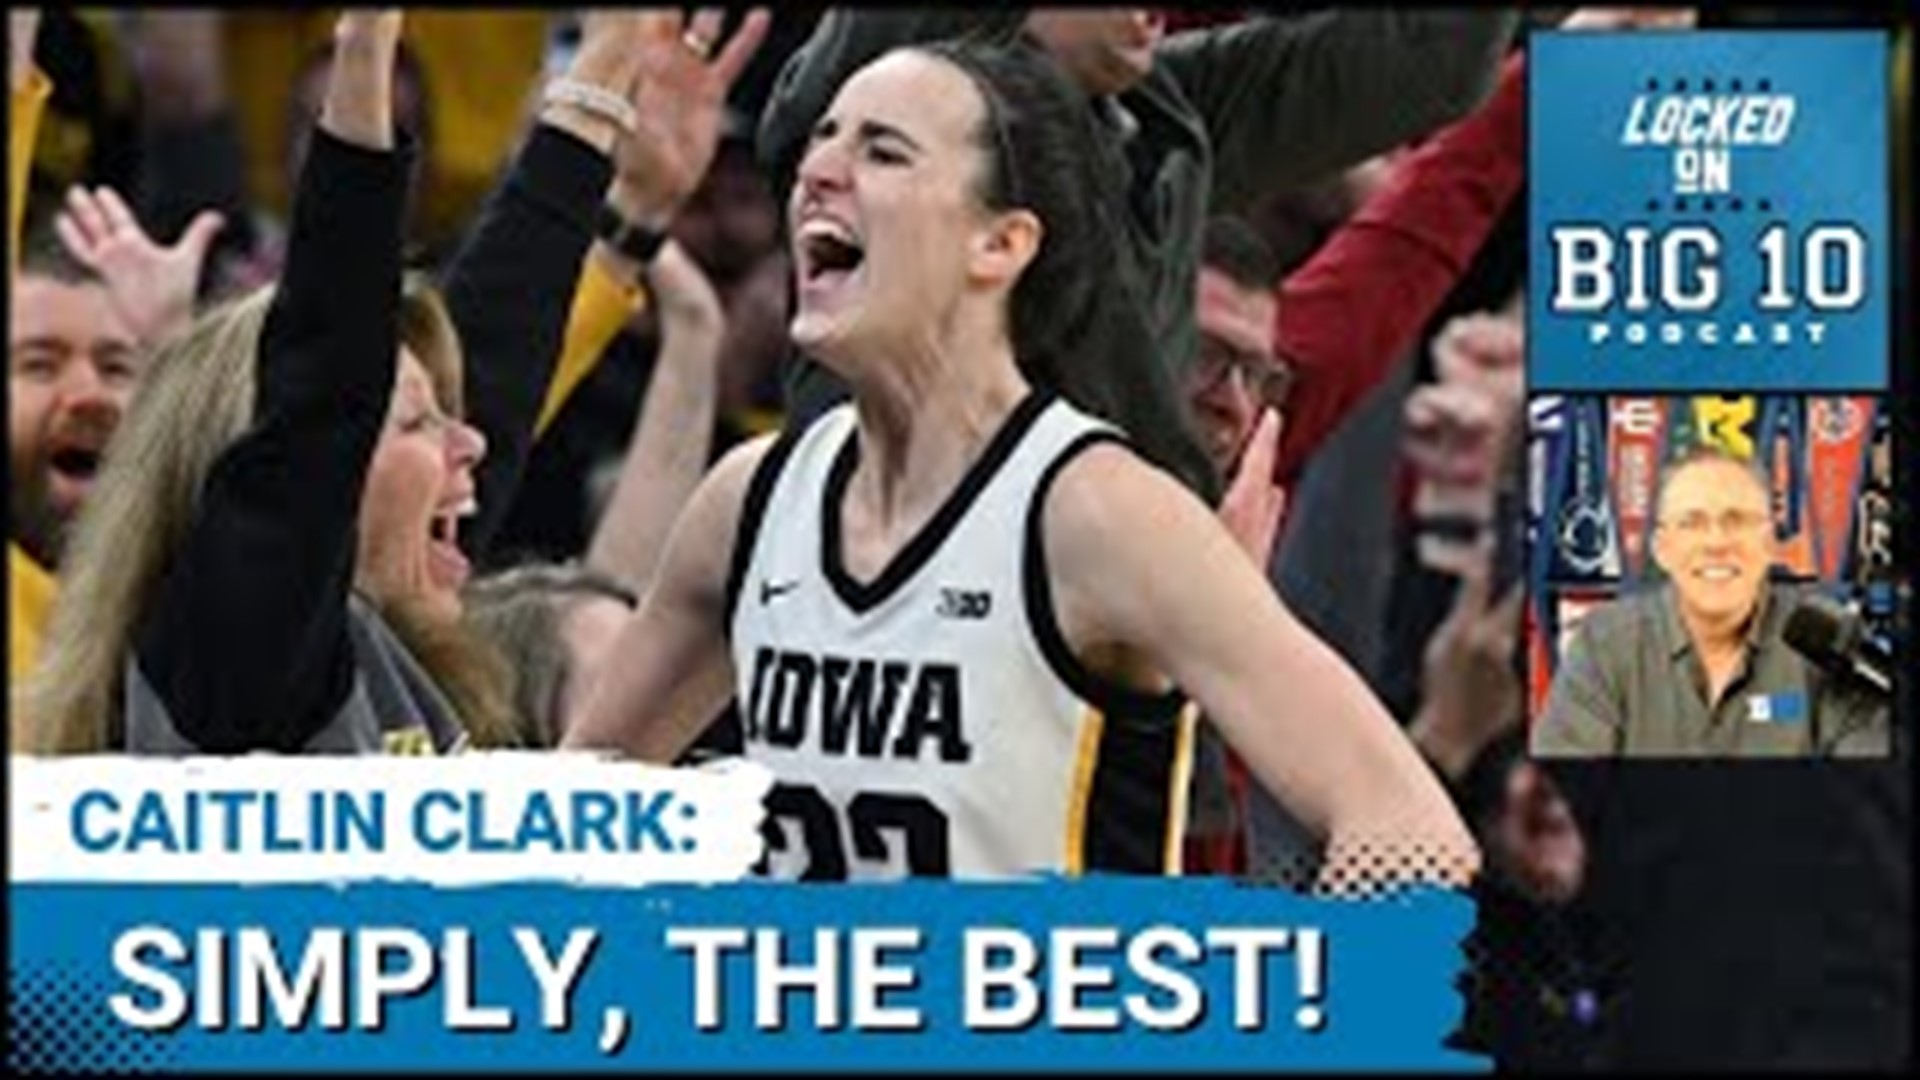 Caitlin Clark became the NCAA Women's all-time scoring leader Thursday night with a career high 49 point performance in the Iowa Hawkeyes 106 - 89 home win.